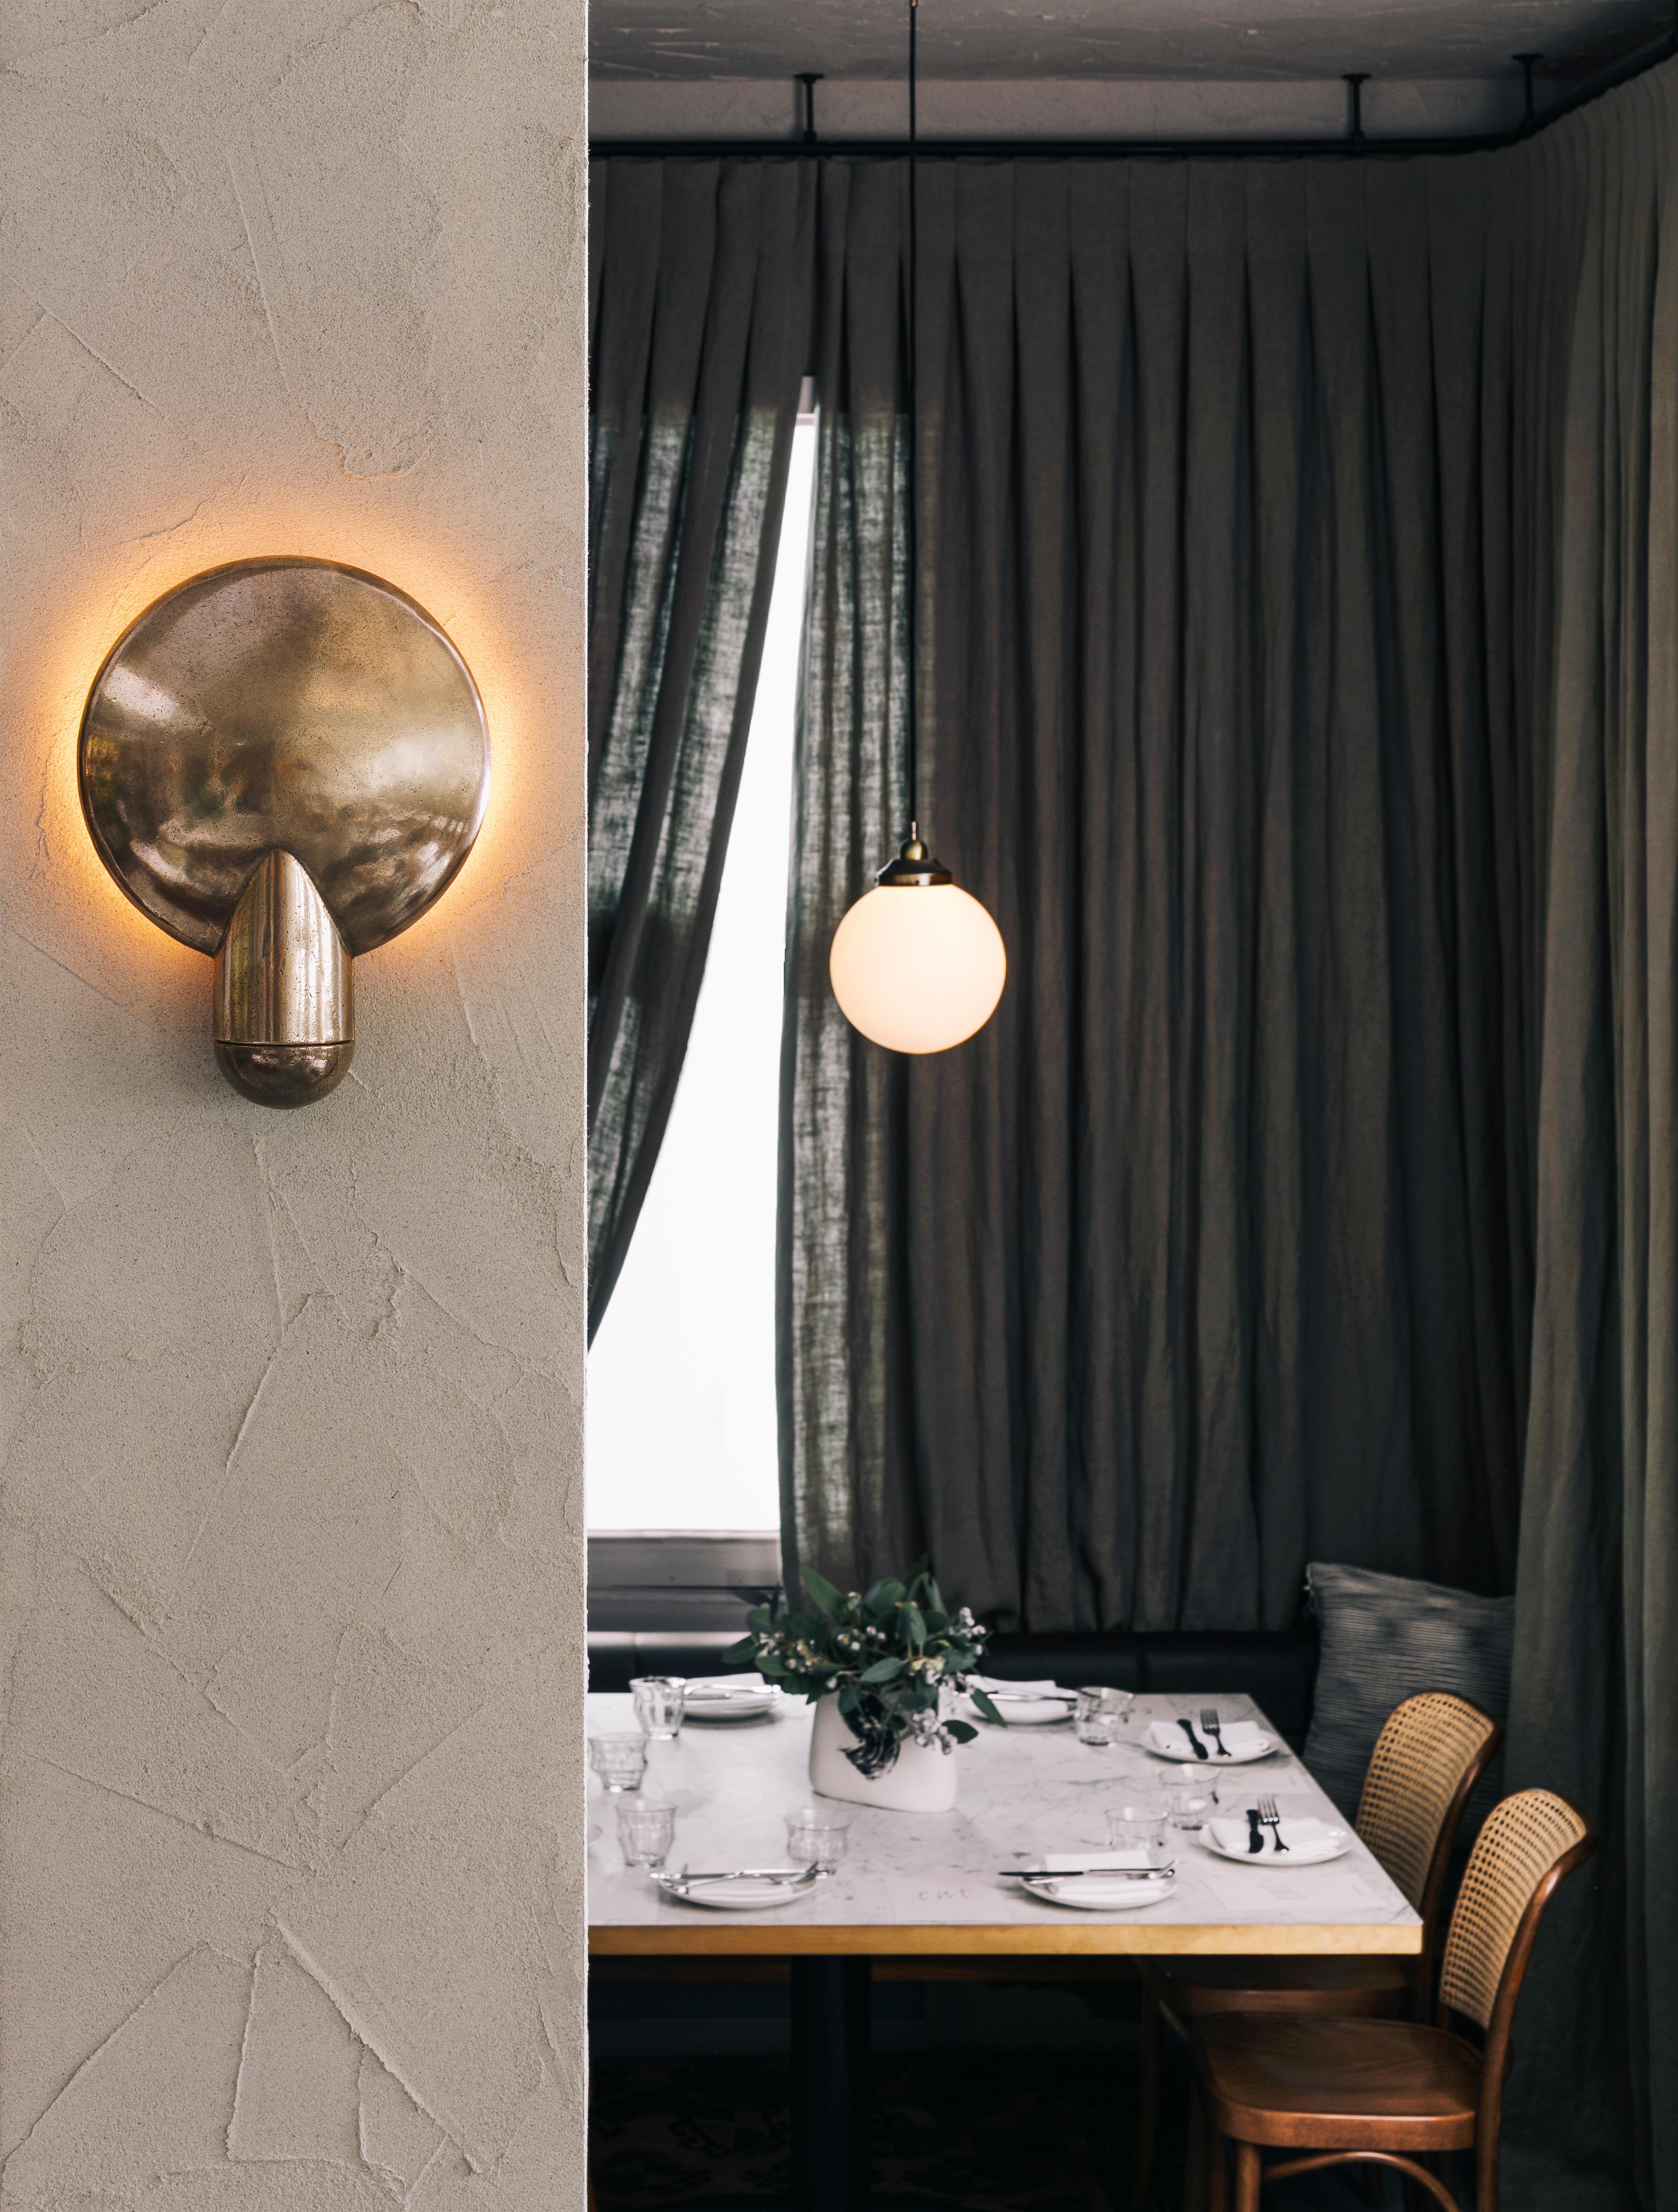 Sculpted bronze sconce light by Henry Wilson
This sculptural item is handmade in Sydney, Australia.
Sandwiched between the two bronze components, the light source is projected onto the concave backing. The light follows the gentle bowl of the dish